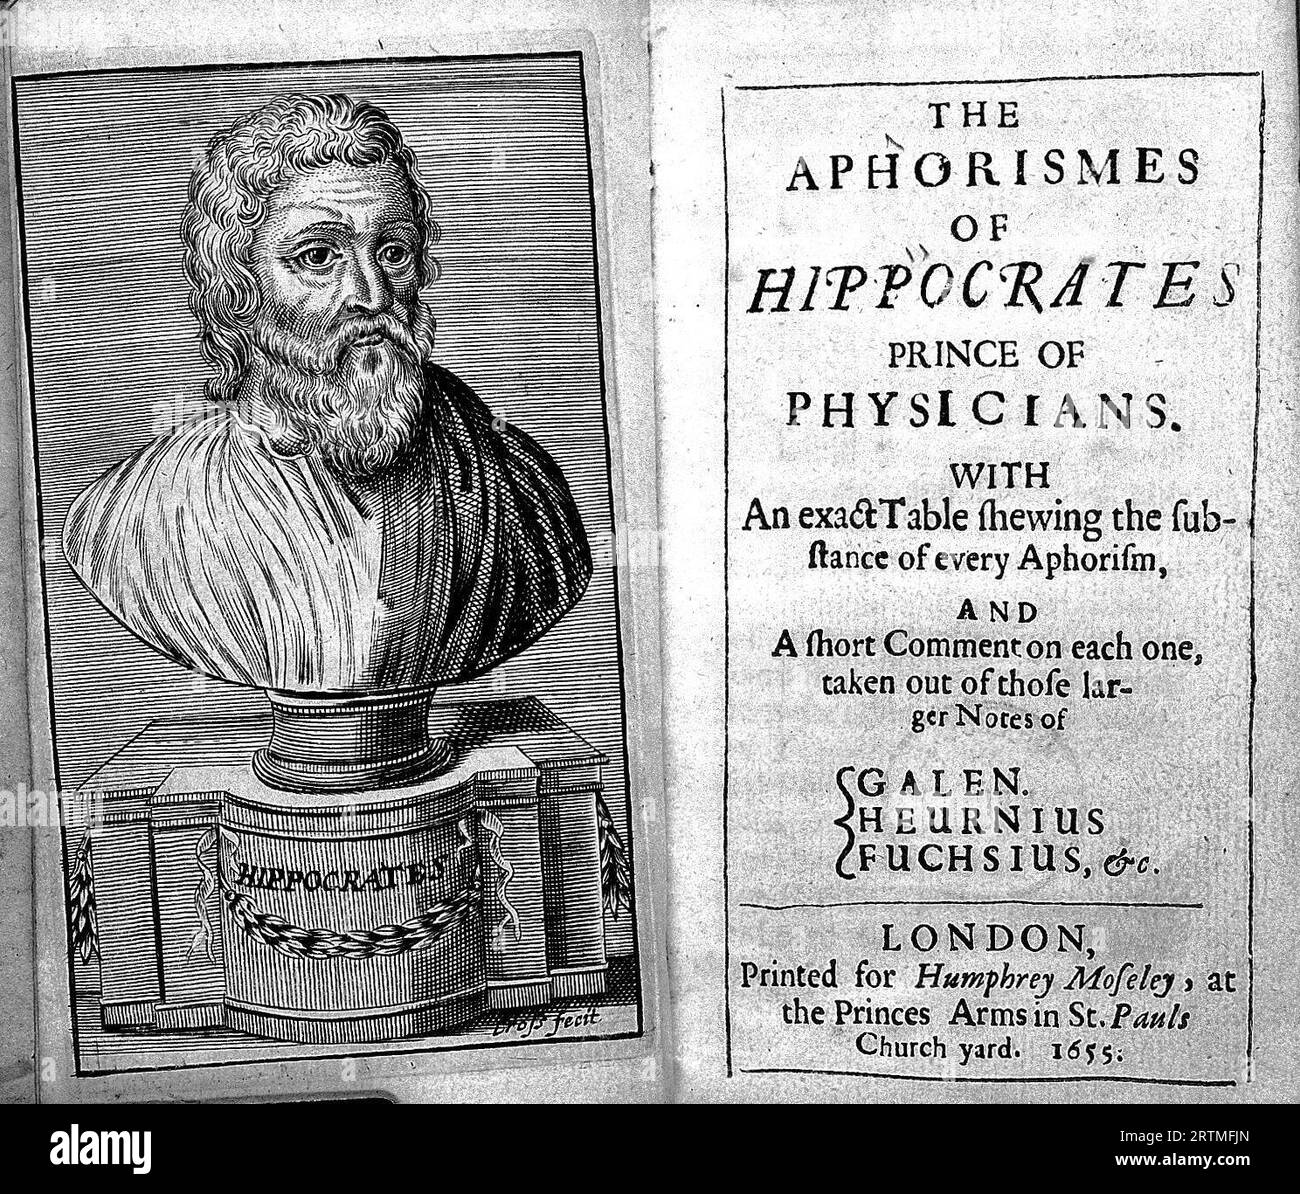 The aphorismes of Hippocrates, 460 – c. 370 B.C., prince of physicians with an exact table showing the substance of every aphorism and a short comment on each one Stock Photo